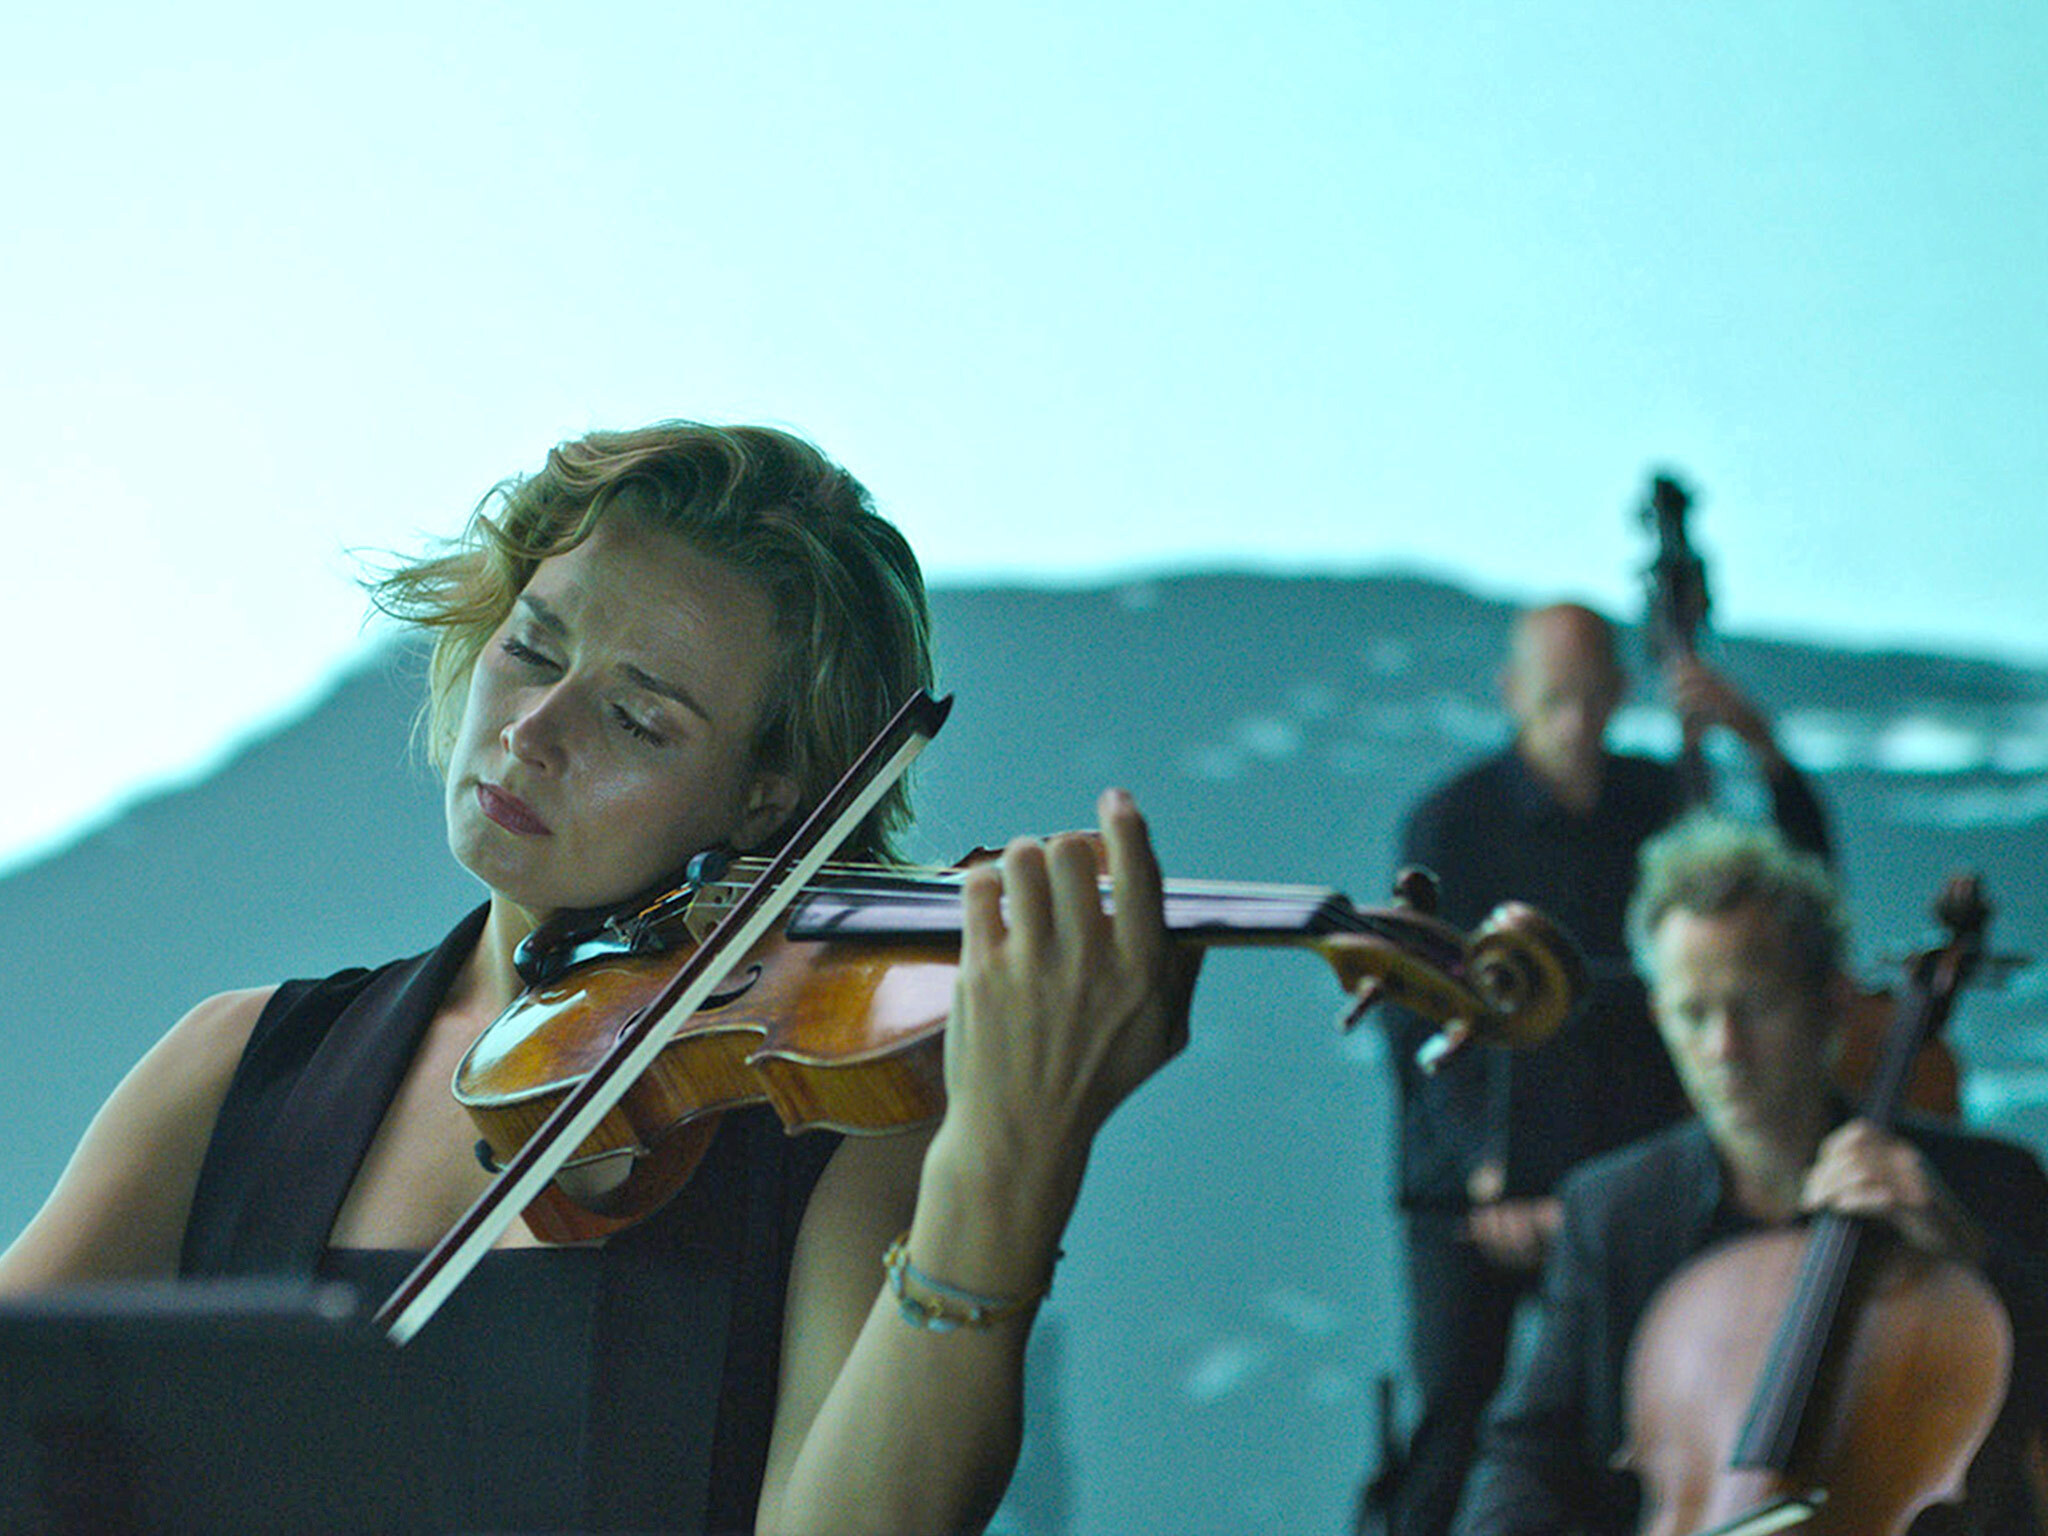 You can stream Australian Chamber Orchestra films online for $30